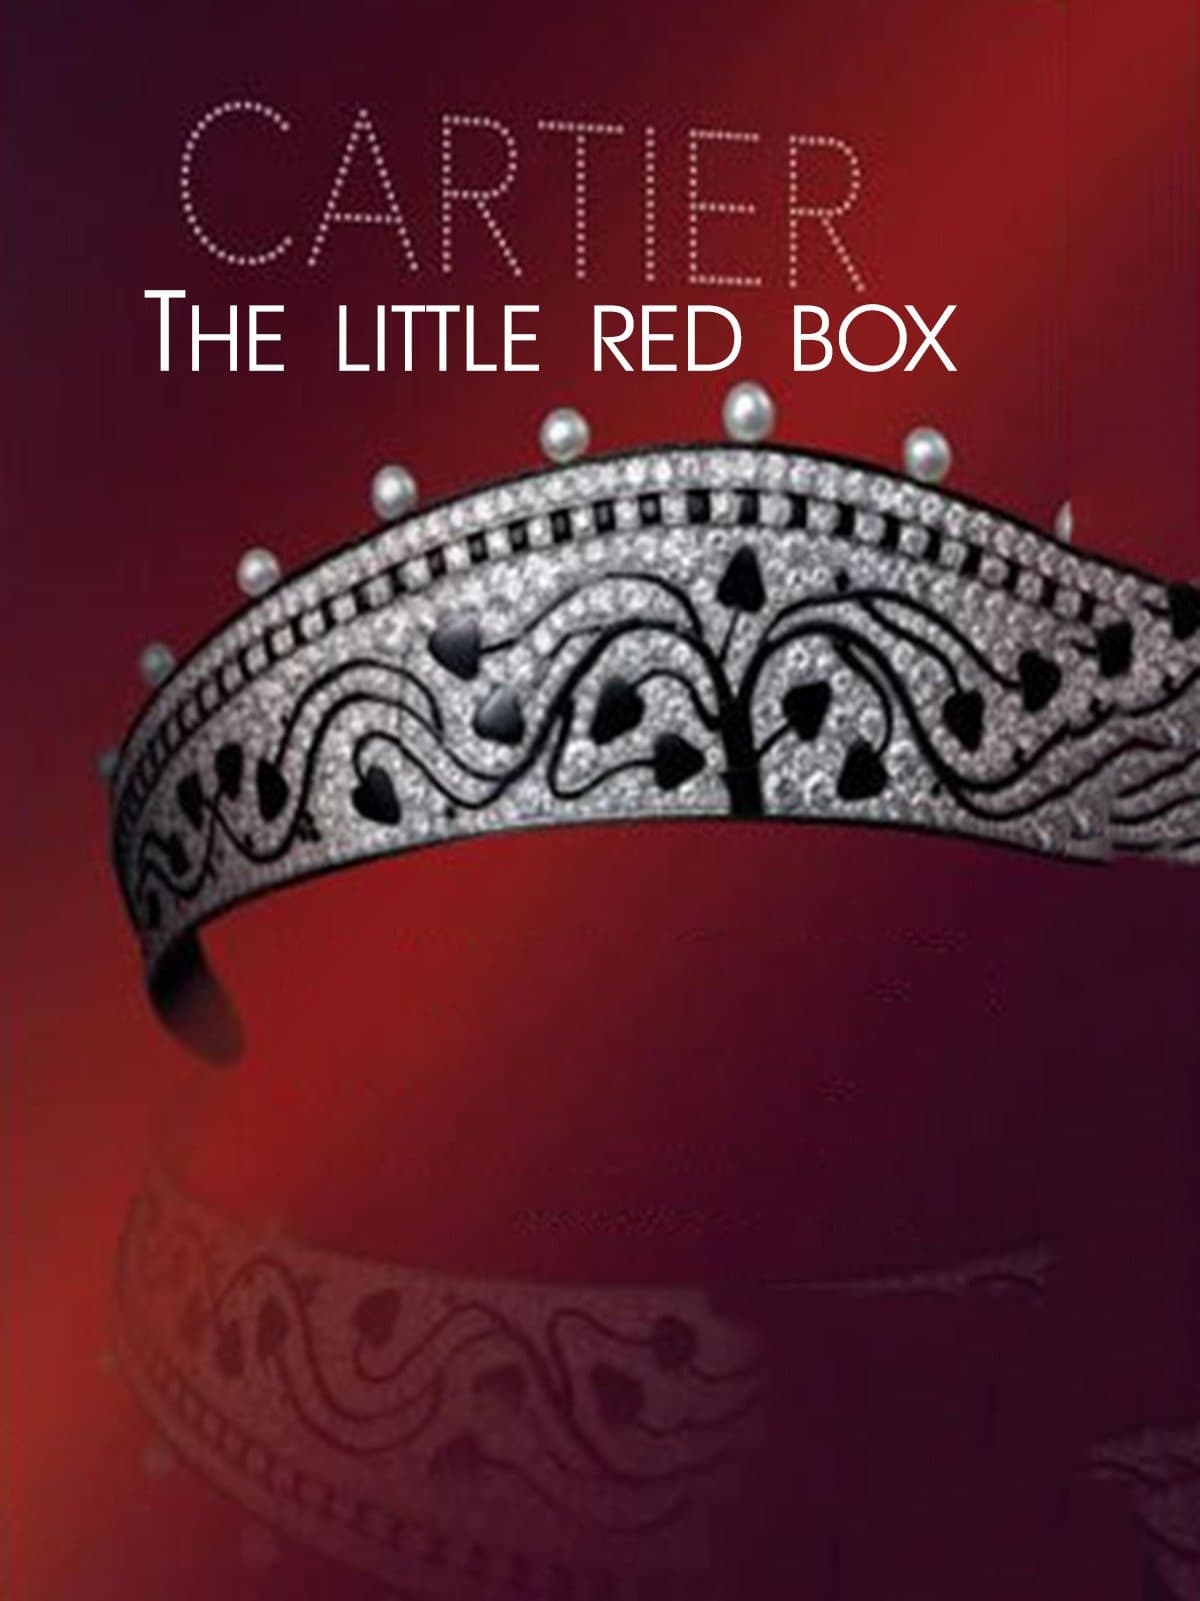 Cartier The little red box